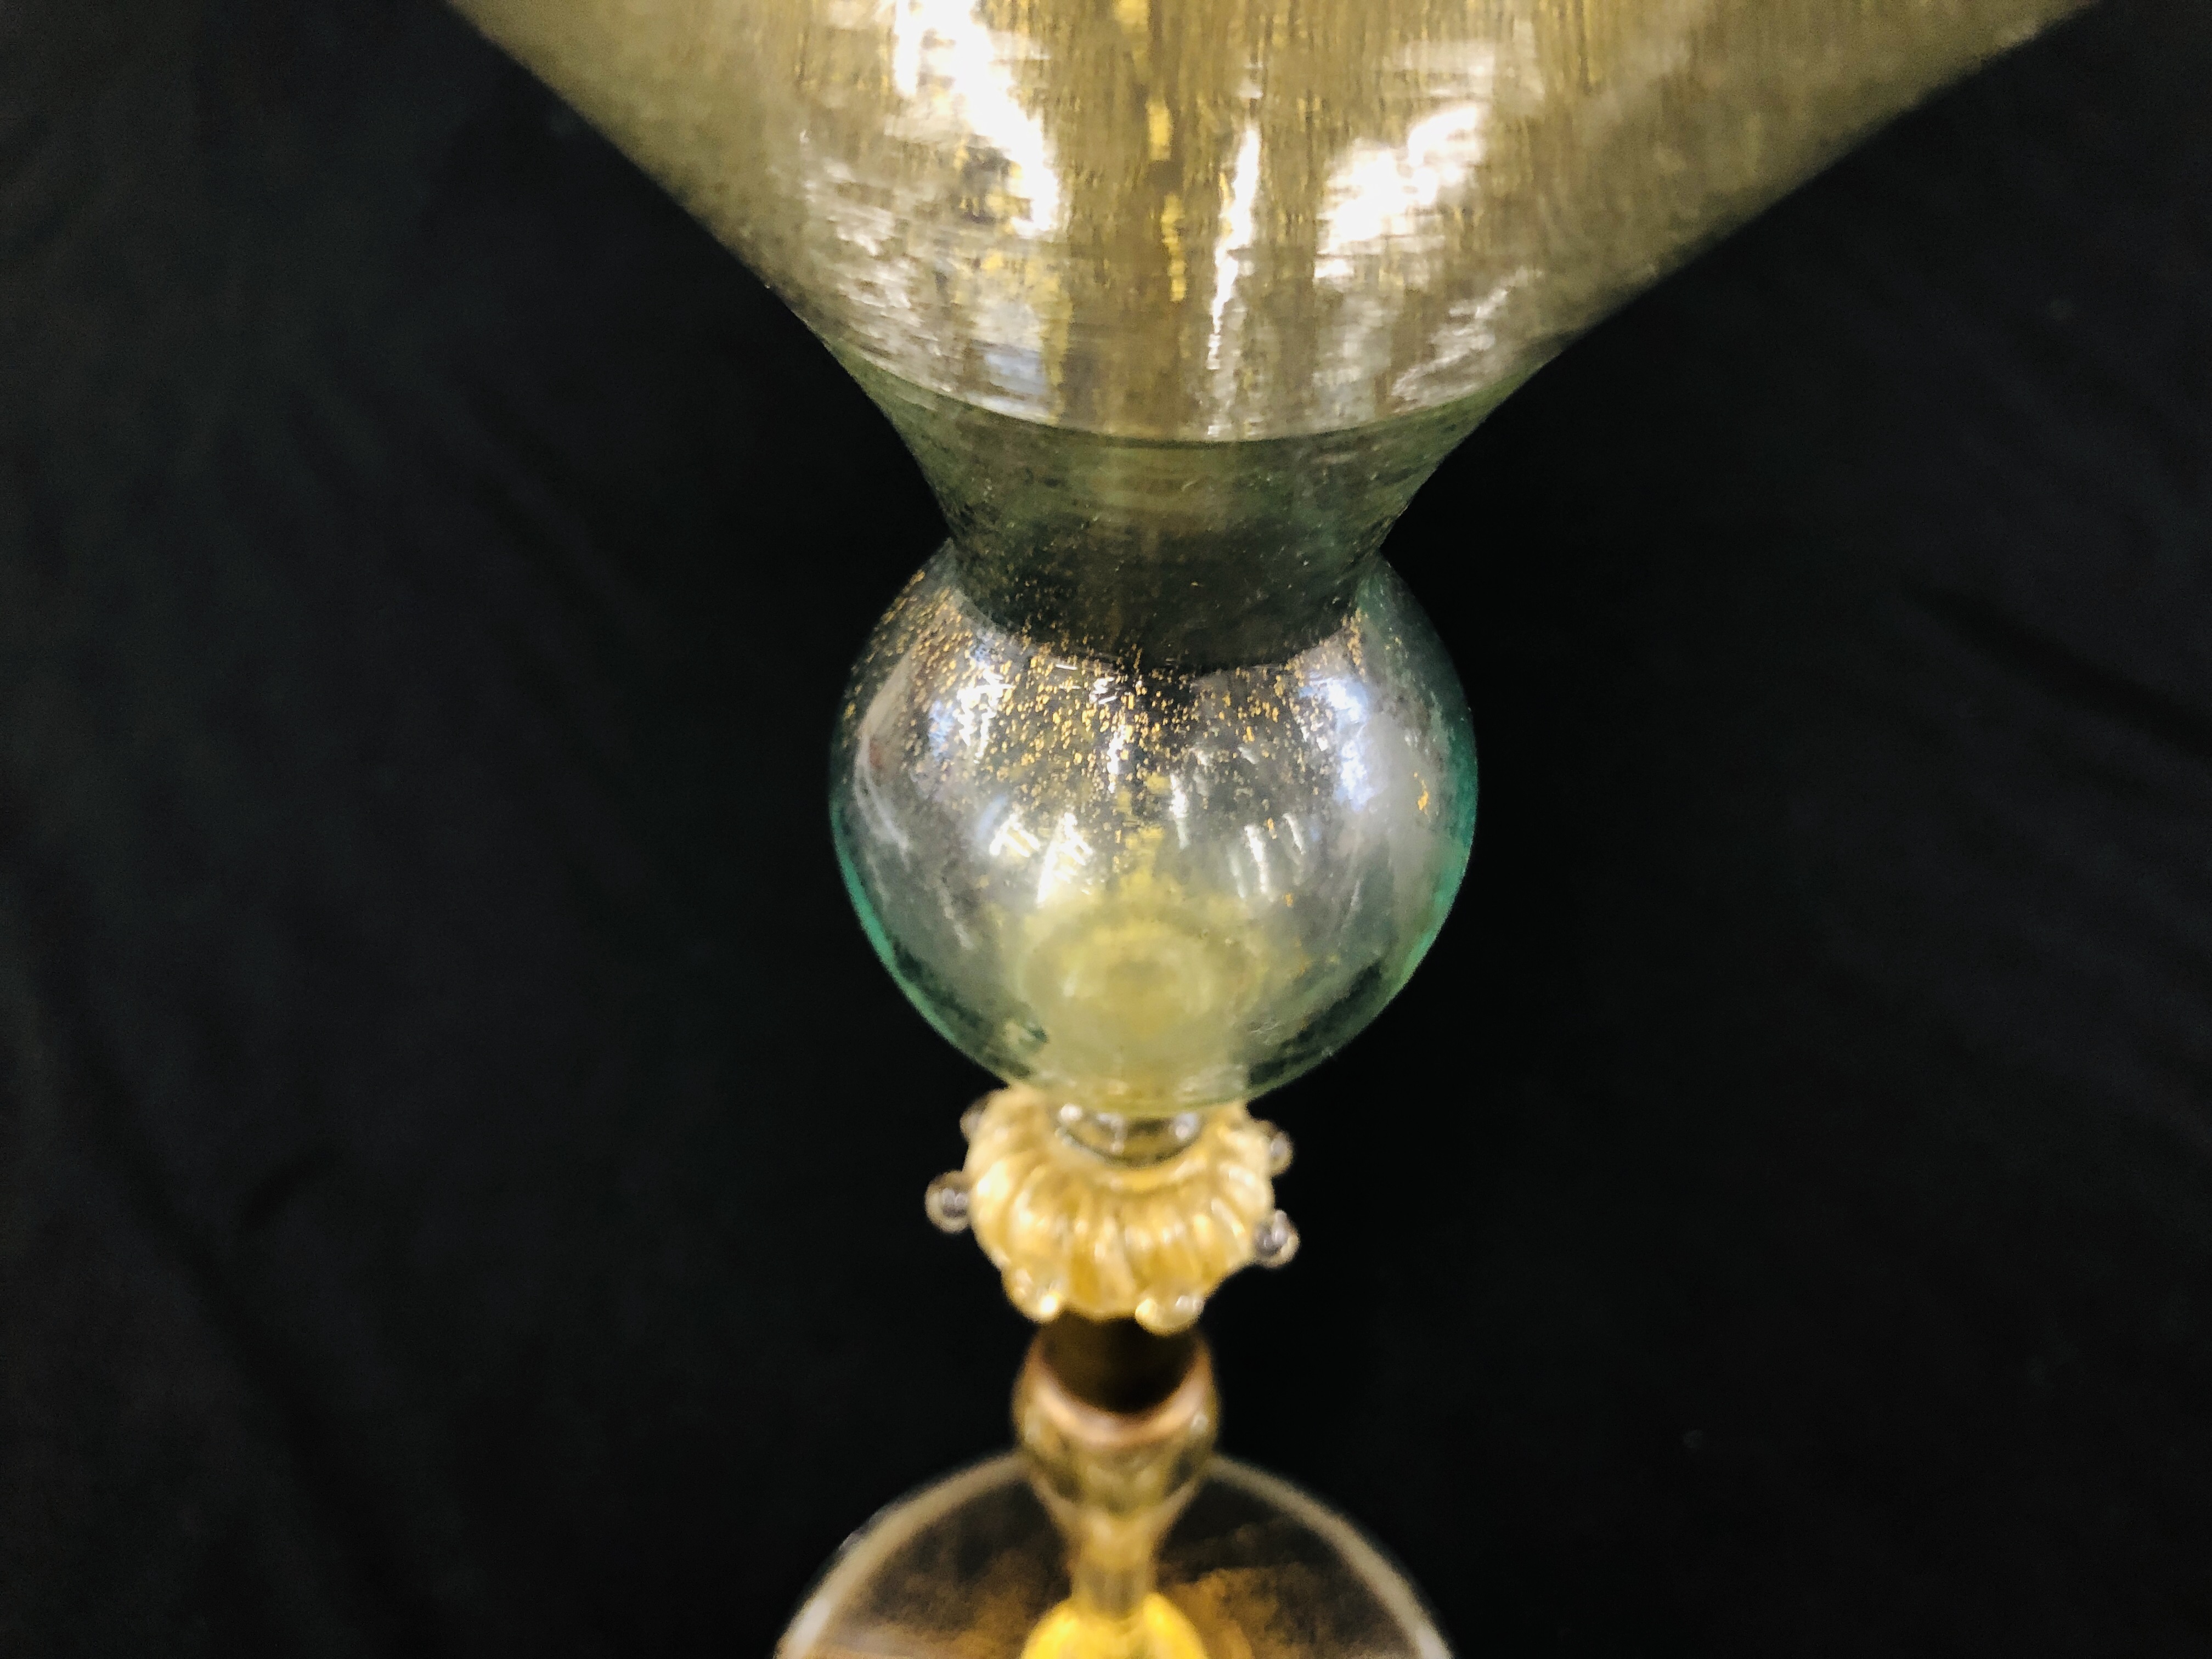 A VENETIAN GLASS WITH CONICAL BOWL, THE STEM WITH WHITE METAL COLLAR, 25.5CM HIGH. - Image 7 of 12